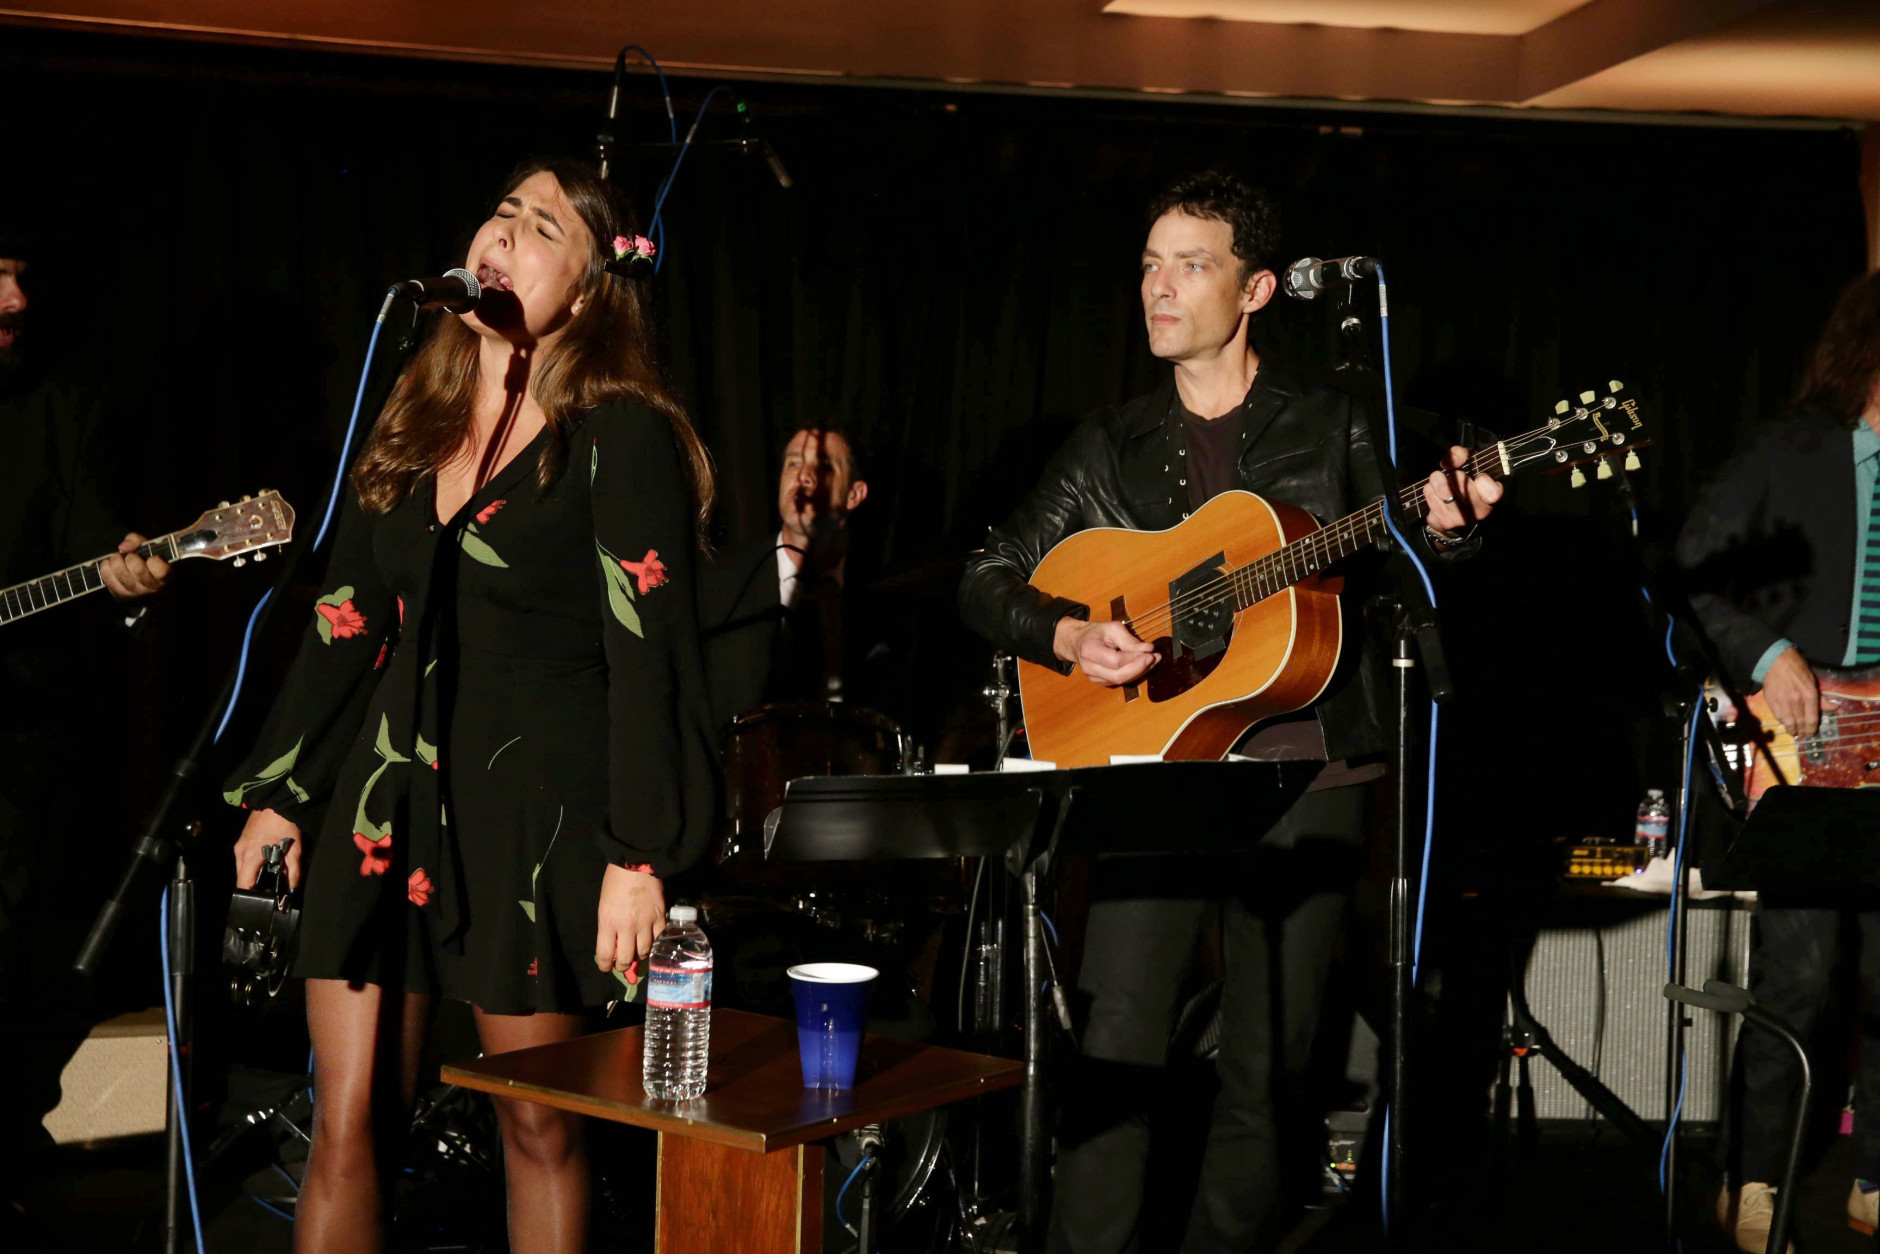 Jade and Jakob Dylan perform at Showtime's Emmy Eve 2015 at Sunset Tower Hotel on Saturday, September 19, 2015, in Los Angeles, CA. (Photo by Eric Charbonneau/Invision for Showtime/AP Images)